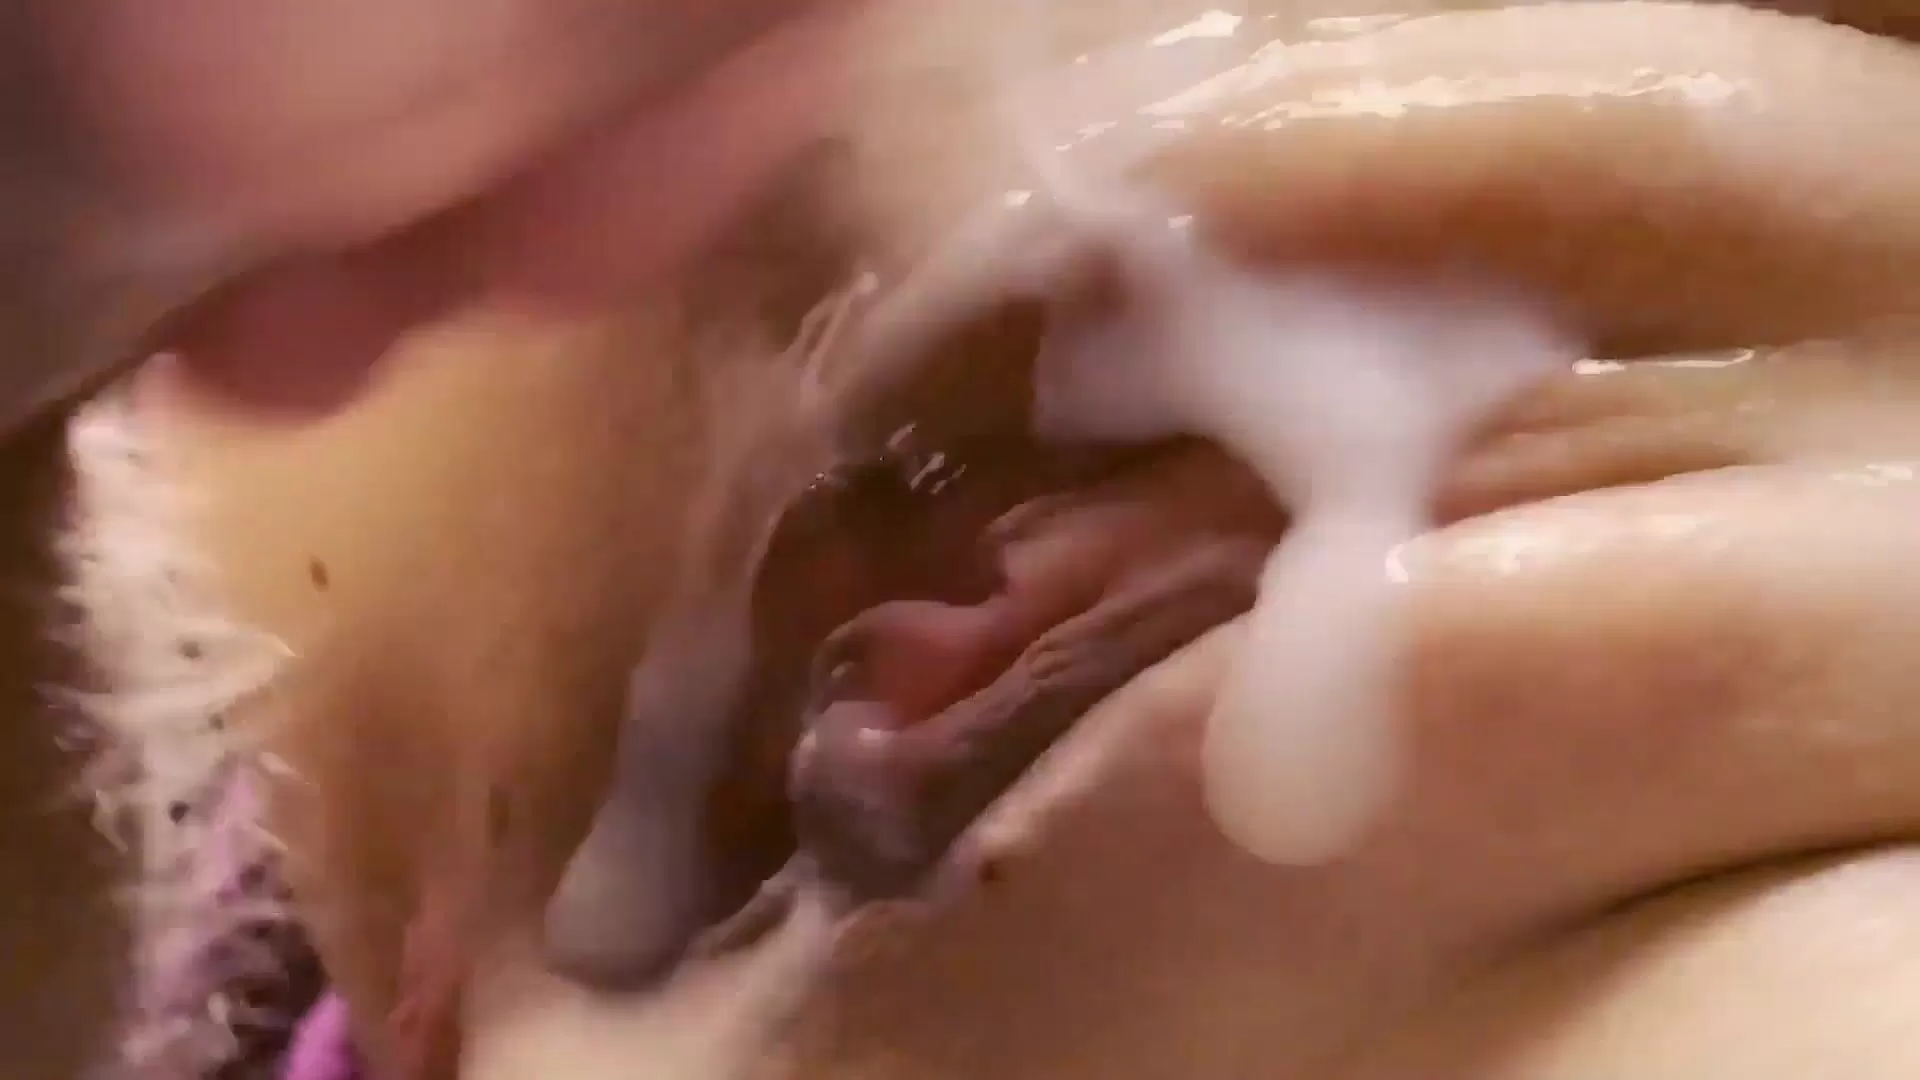 The BEST AMATEUR HOMEMADE CUMSHOT ORGASM CREAMPIE COMPILATION picture photo